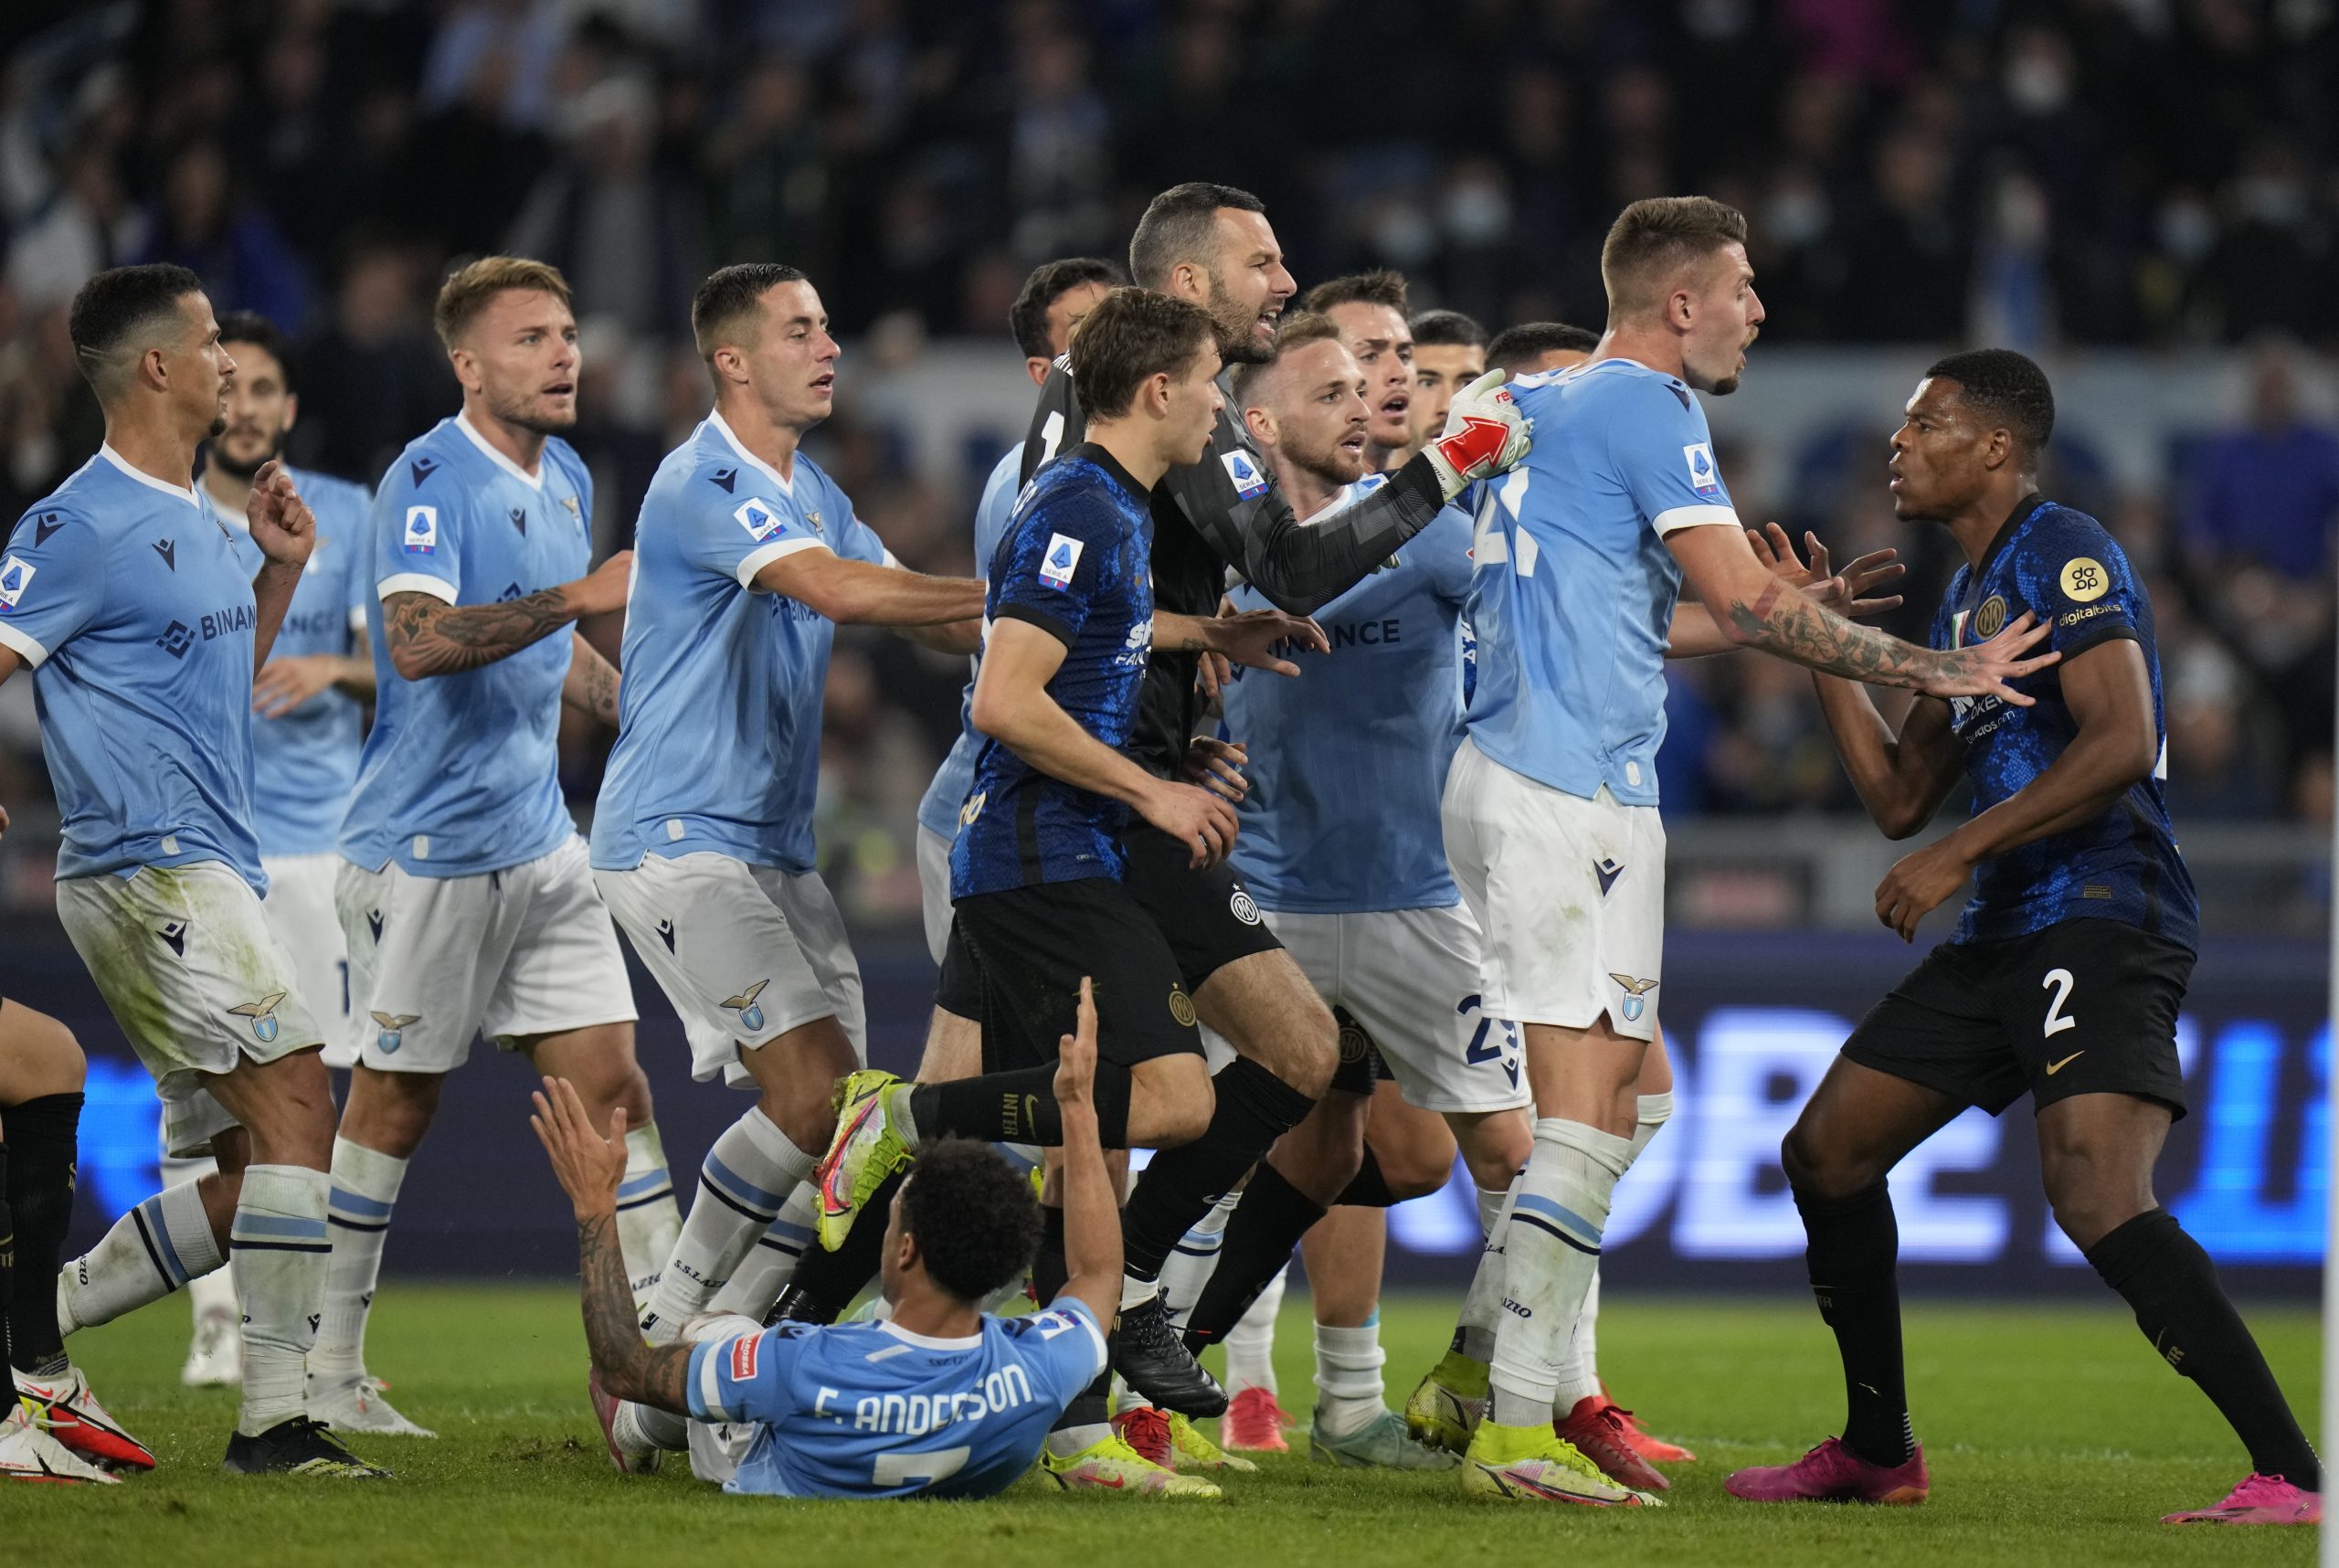 Inter Milan's Denzel Dumfries, right, and Lazio players argue during a Serie A soccer match between Lazio and Inter Milan at Rome's Olympic stadium, Saturday, Oct. 16, 2021. (AP Photo/Alessandra Tarantino)